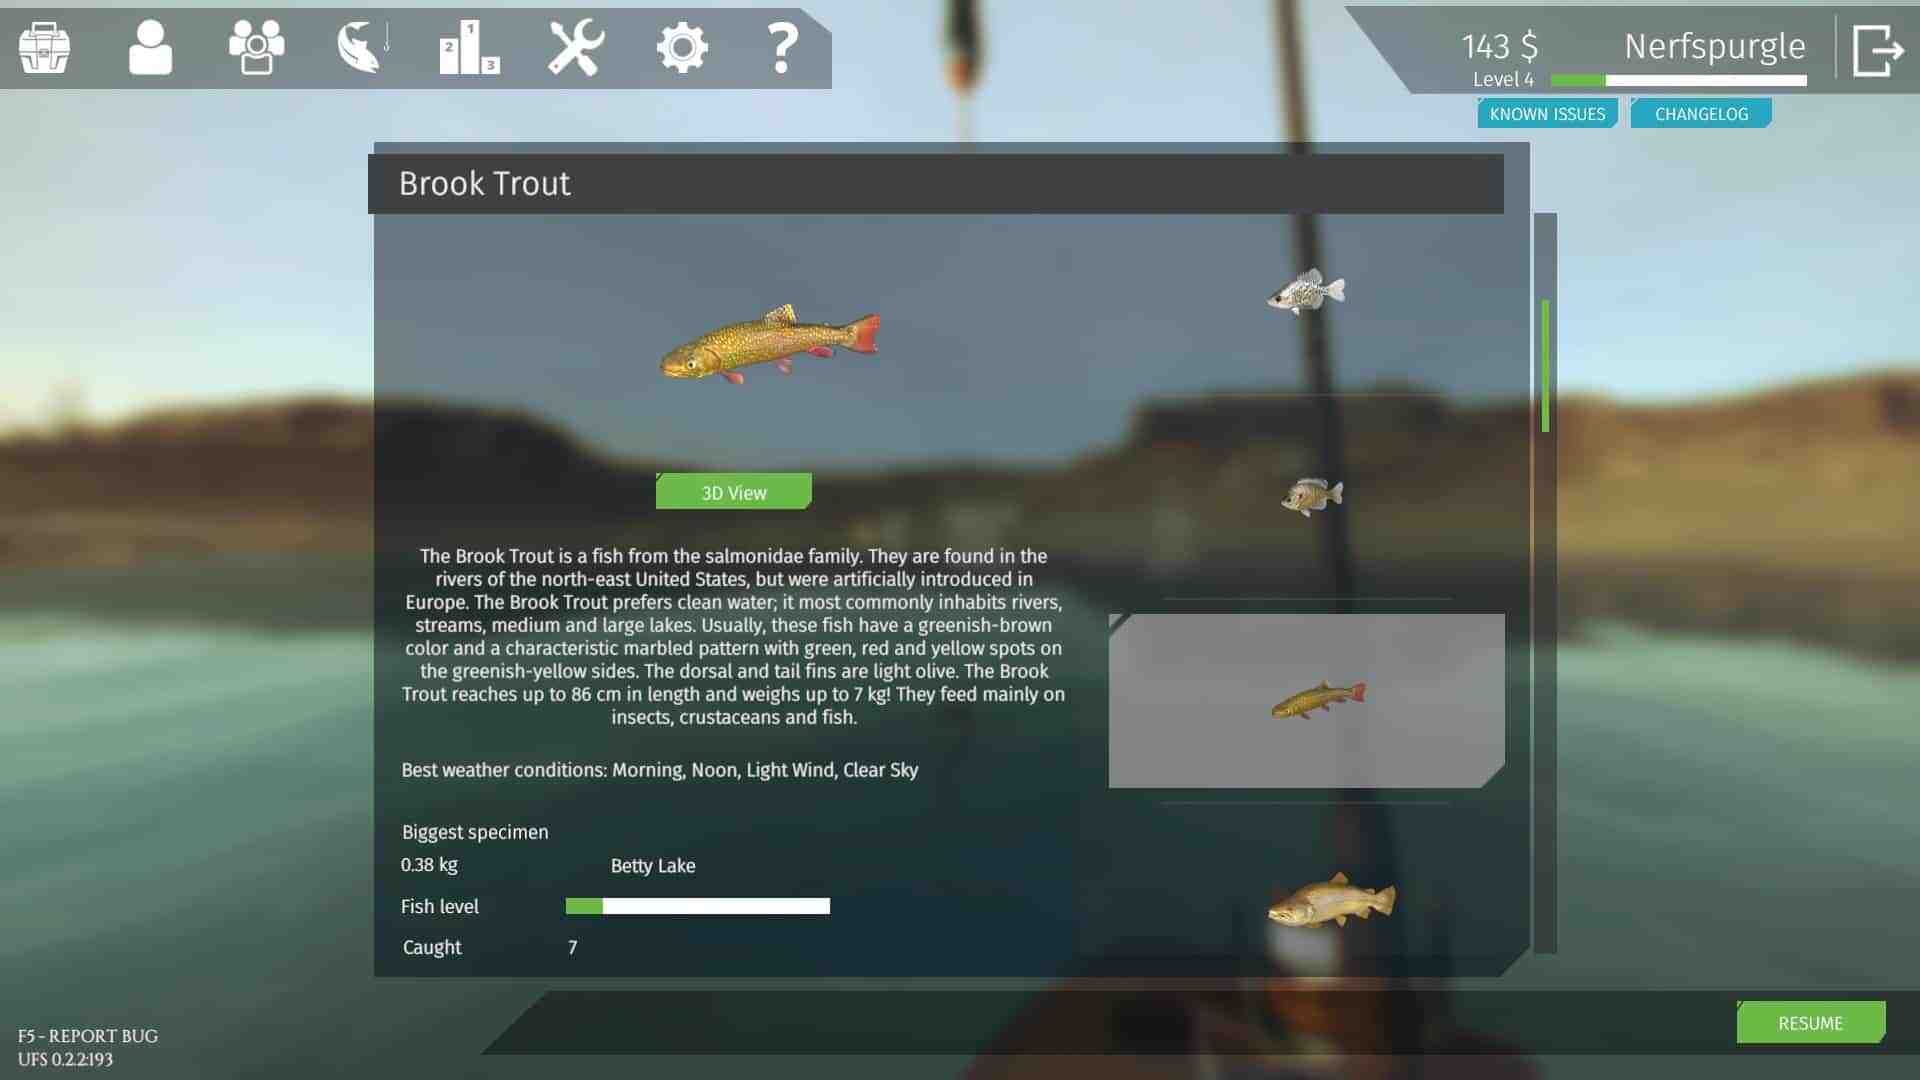 Reel in free-to-play PS4 fishing simulator Fishing Planet from